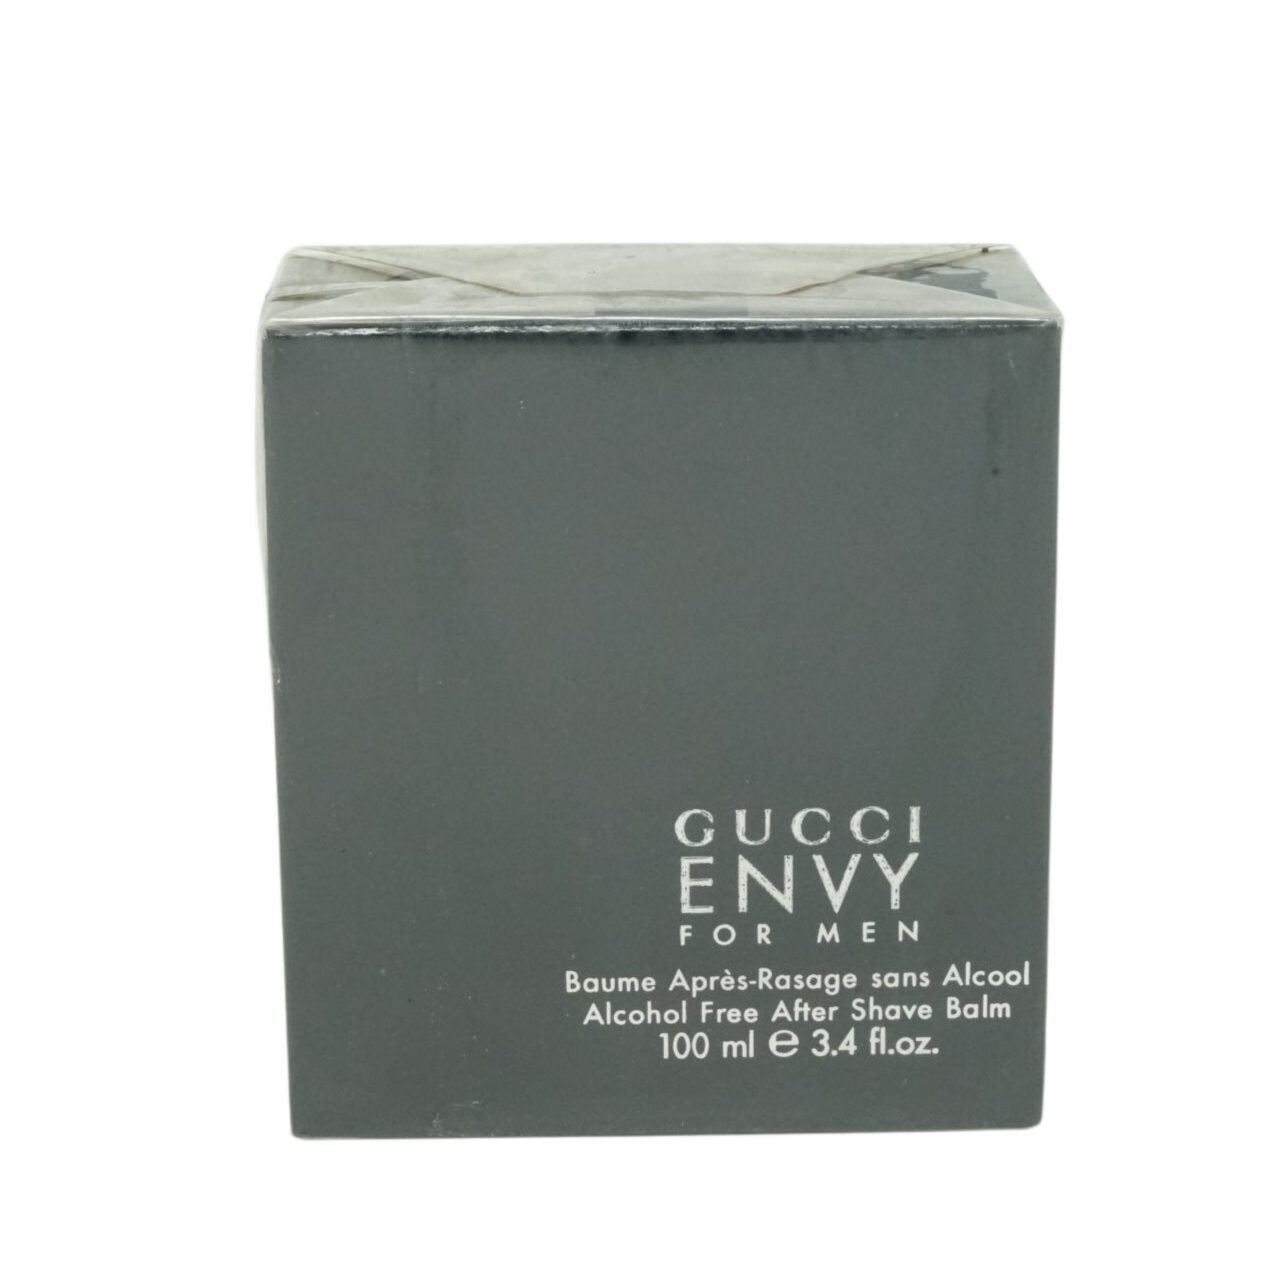 Shave Frei 100ml Envy GUCCI After-Shave Alkohol After Gucci Balm Balsam